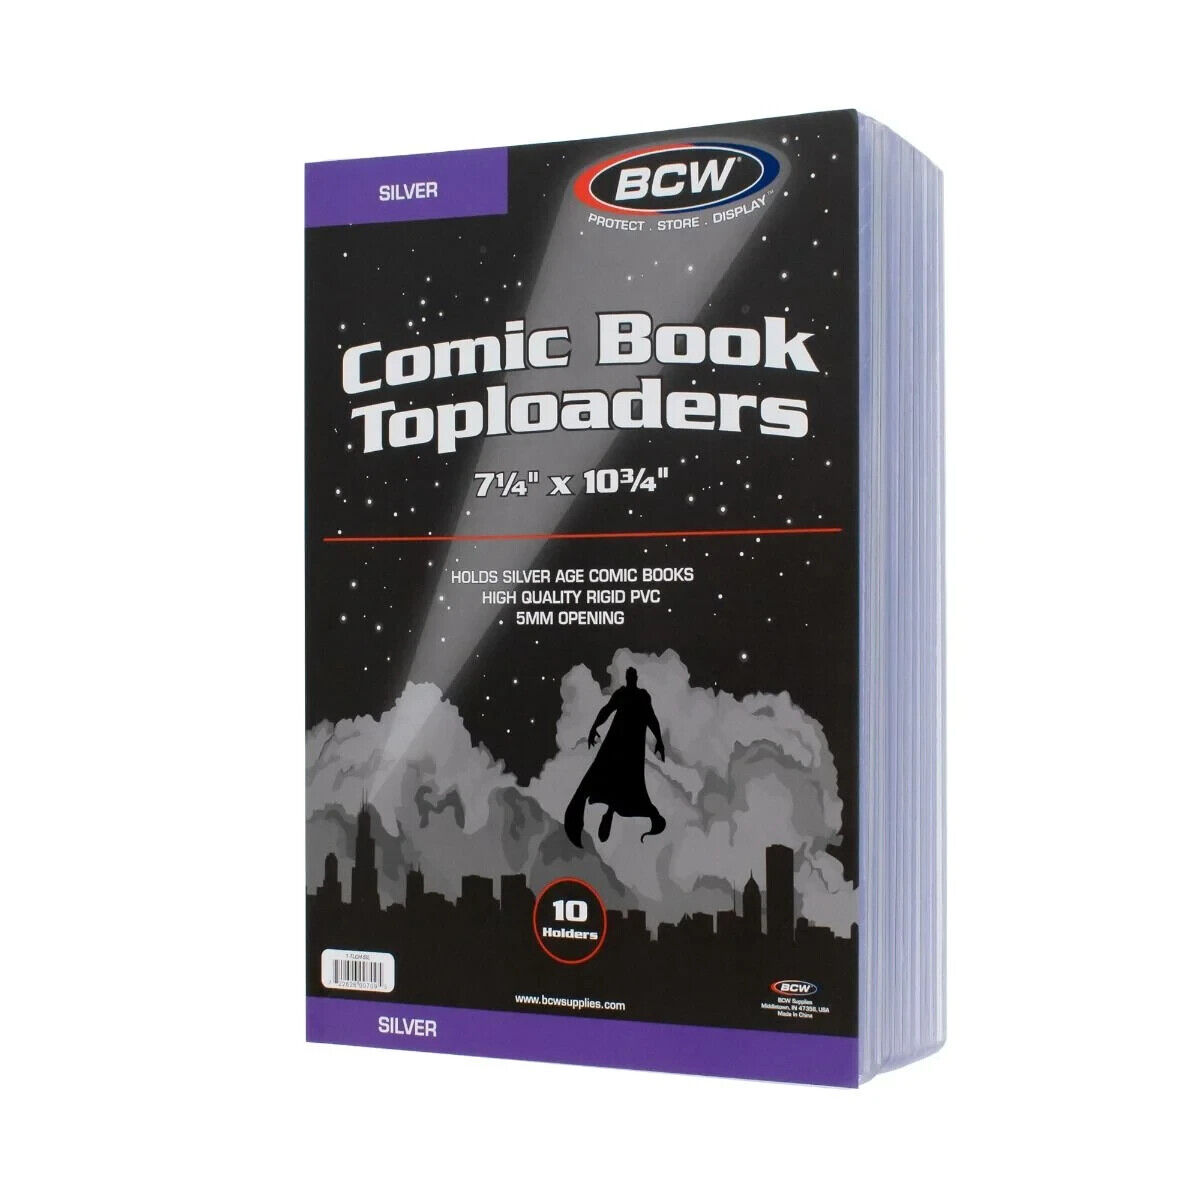 200 BCW Comic Book Toploaders (Silver Age) - Rigid 5mm Plastic Top load Holders